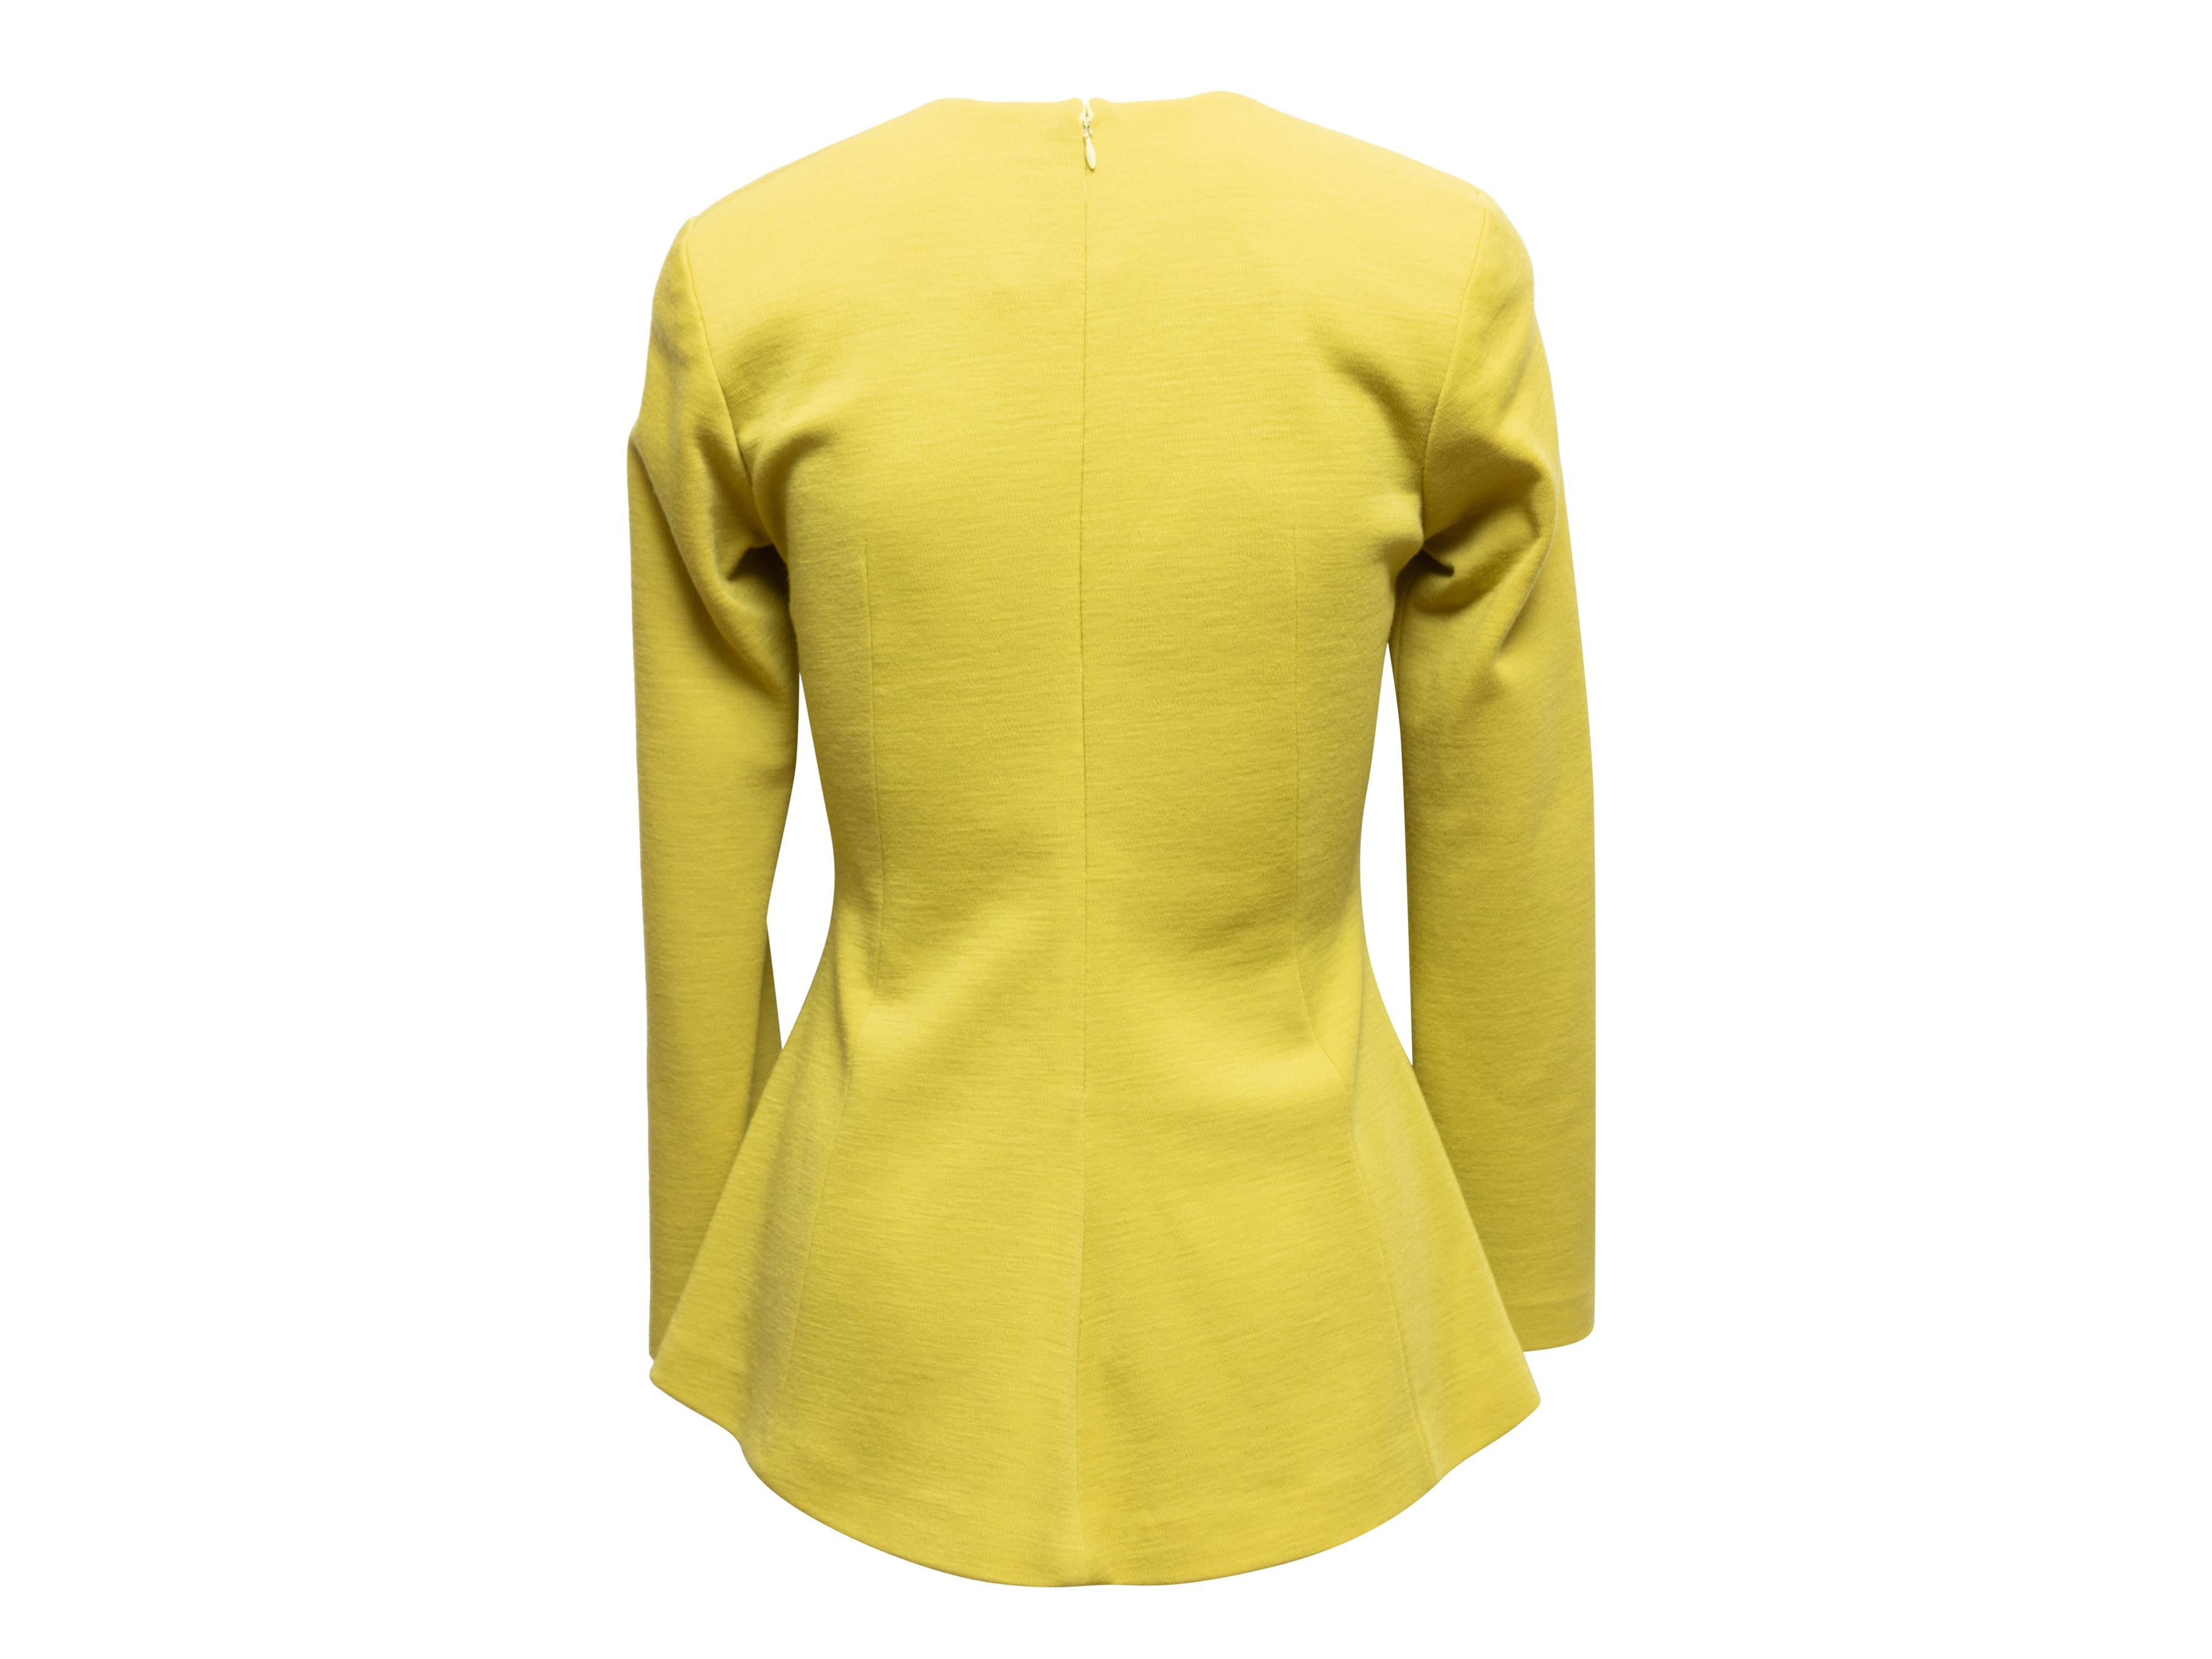 Vintage Chartreuse Marc Bouwer Long Sleeve Top In Good Condition For Sale In New York, NY